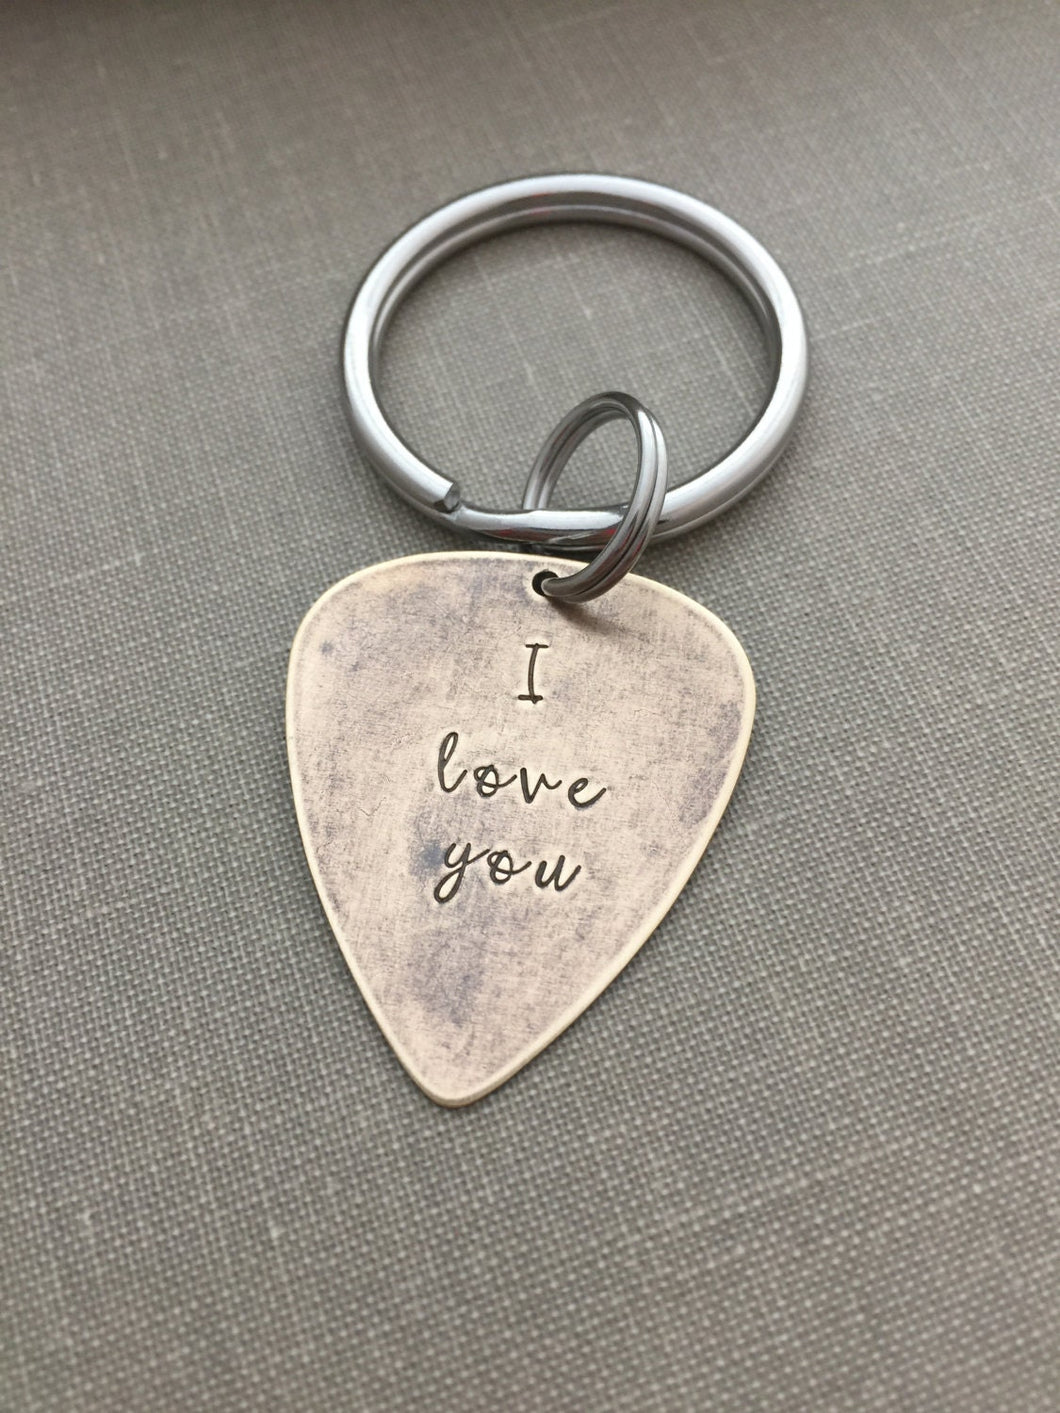 I love you - guitar pick keychain - rustic brass key chain  - gift for musician - music lover - optional customize with date or initials